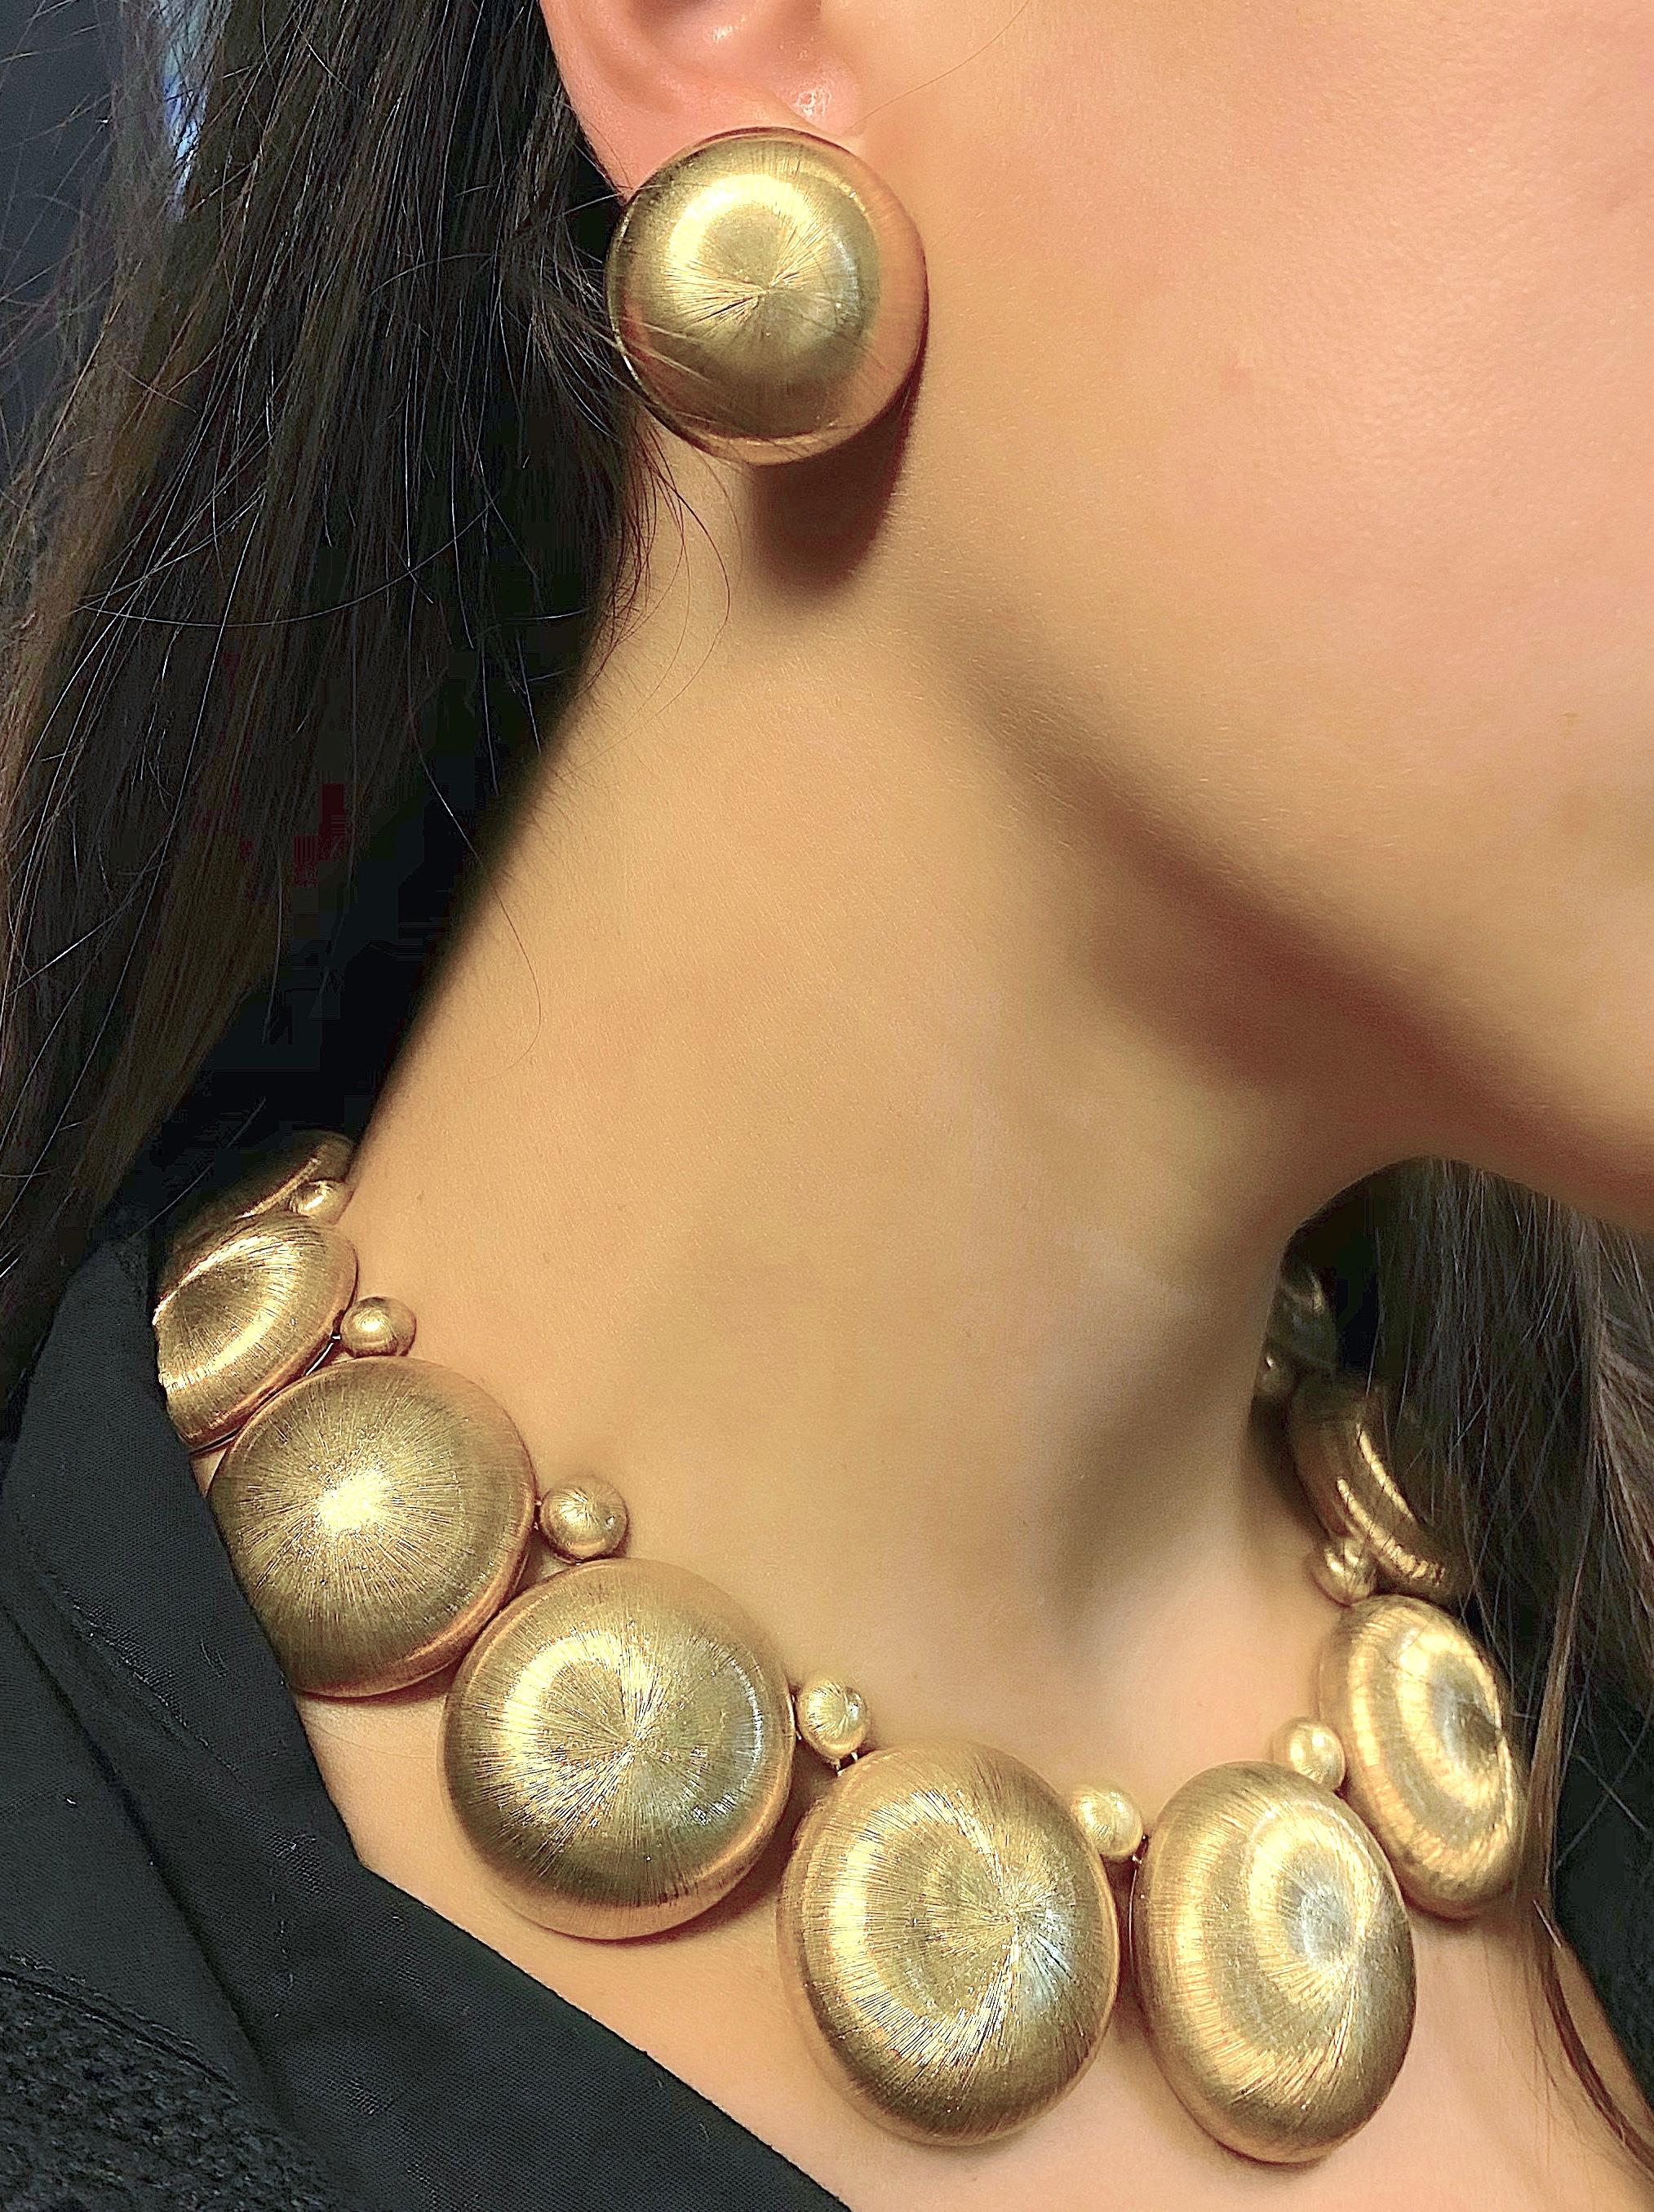 We offer a stunning fashion necklace and ear clip set of graduated and softly rounded 18K gold disks with a unique hand finish simulating thousands of lustrous gold silk threads. A total weigh of 253.8 grams. The necklace disks graduate from 3/4